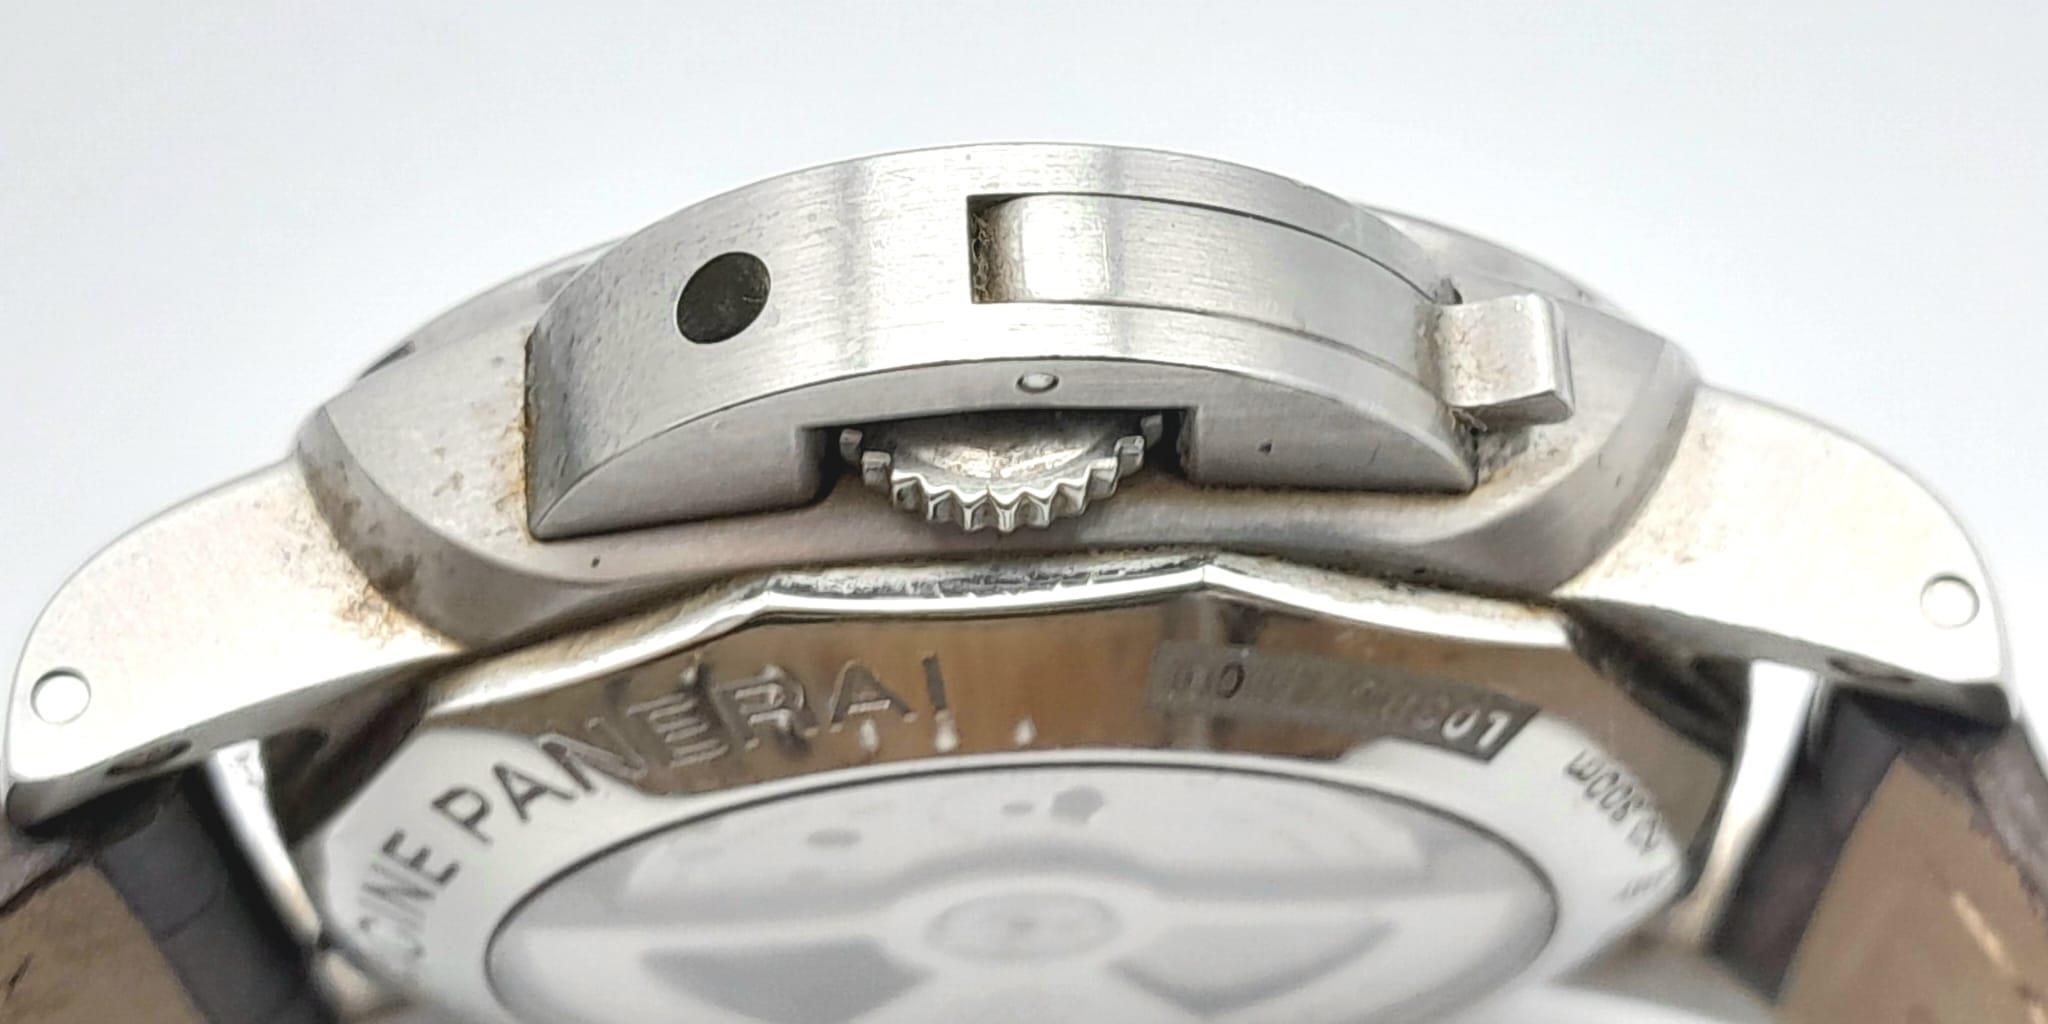 A "PANERAI LUMINOR GMT" WITH SKELETON BACK IN STAINLESS STEEL, A VERY SOUGHT AFTER PRESTIGE WATCH! - Image 9 of 11